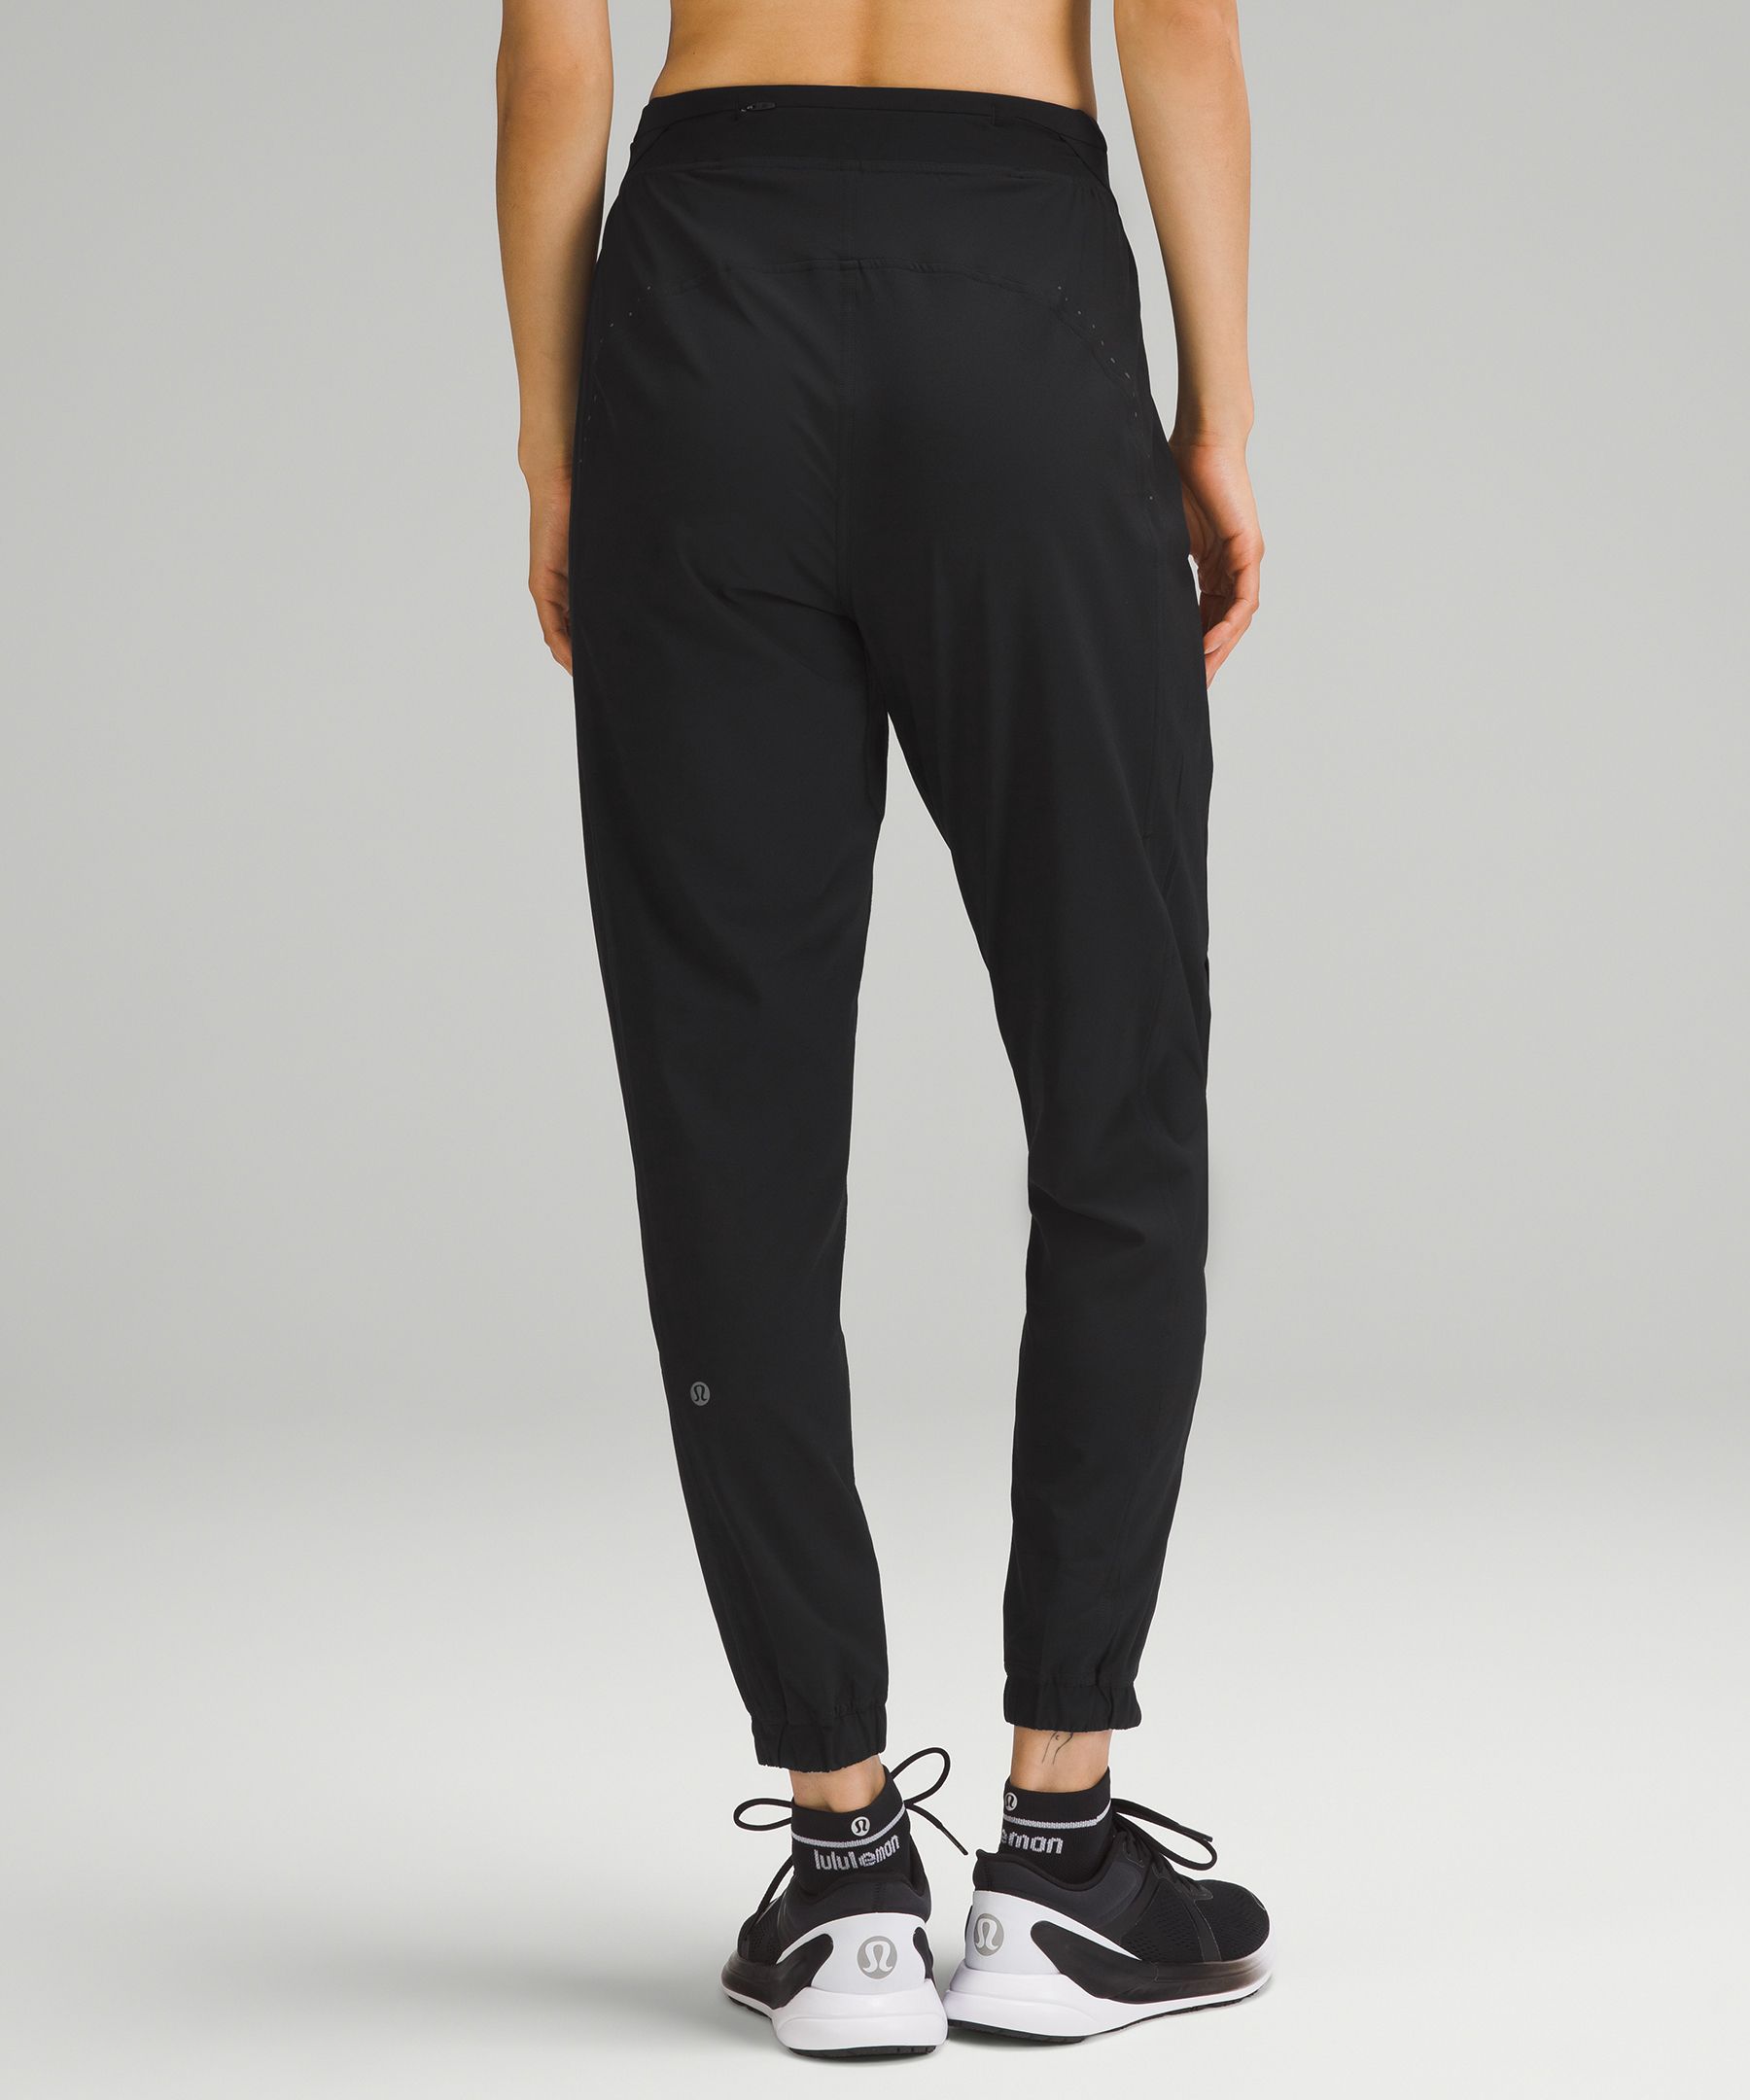 Trying on the new adapted state airflow jogger from lululemon